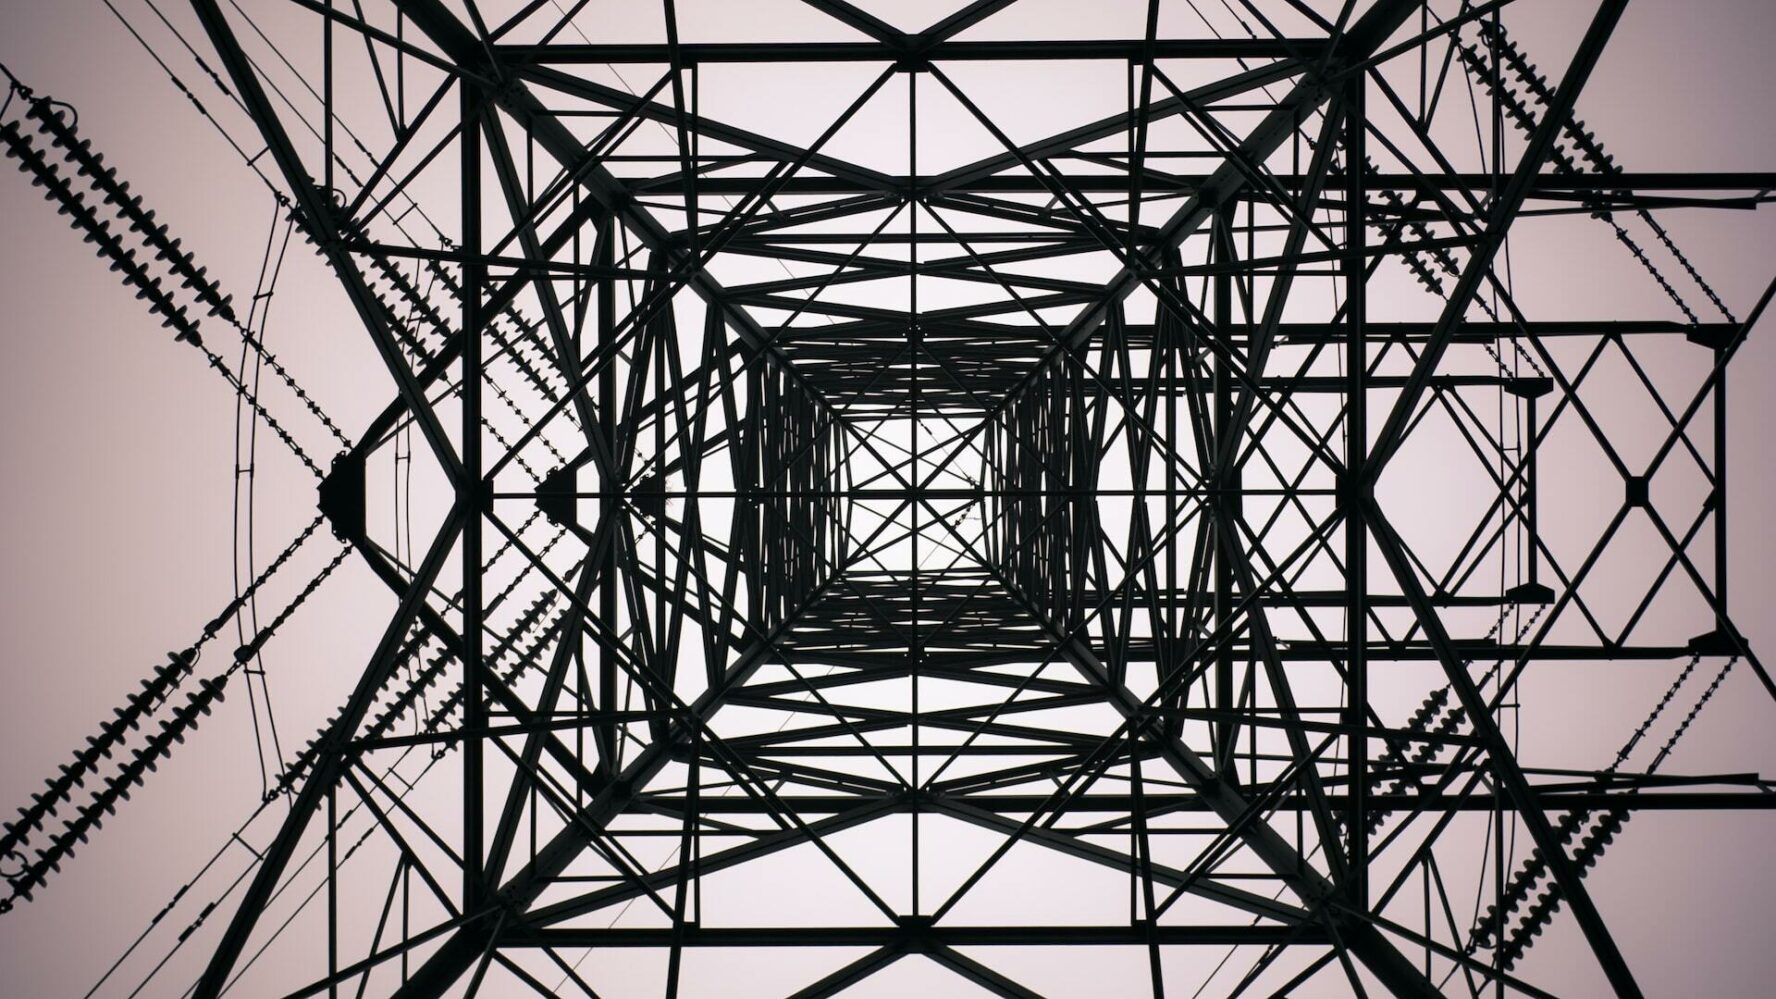 The inside of an electrical power pylon